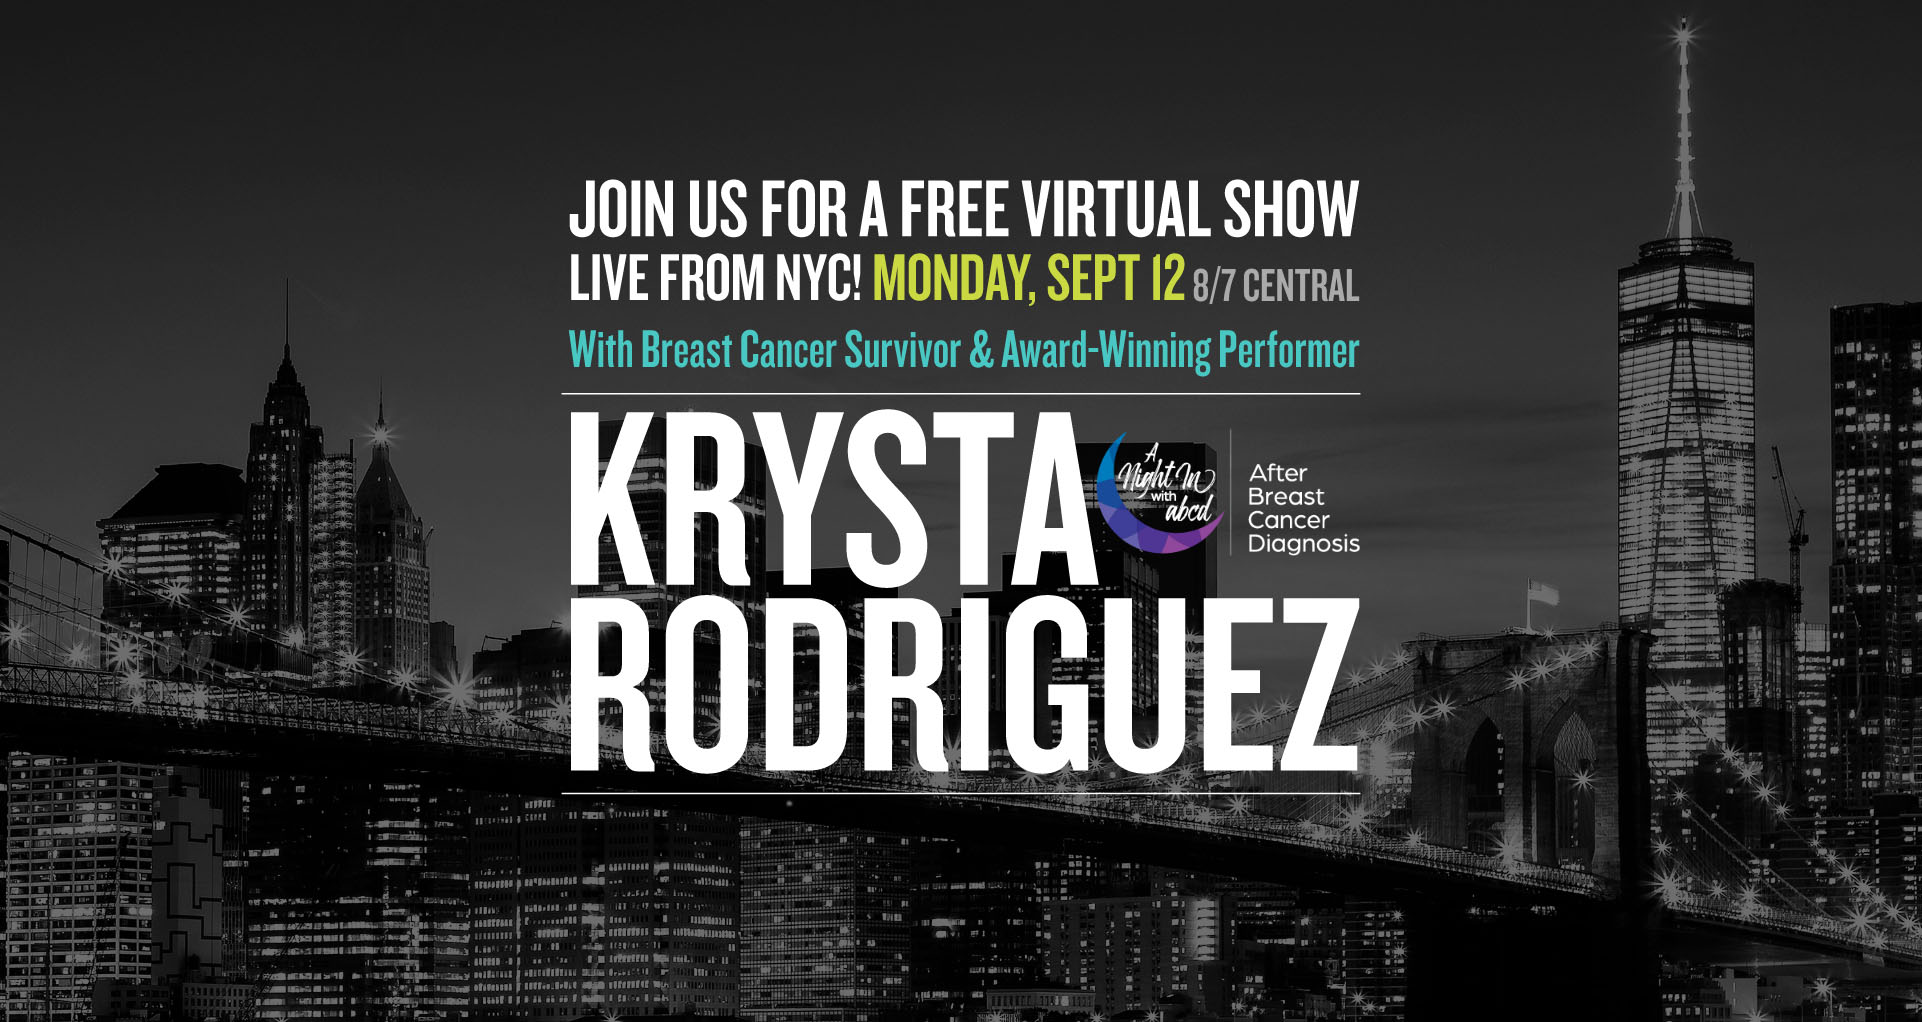 Join us for a show of support featuring Krysta Rodriguez, breast cancer survivor and award-winning performer